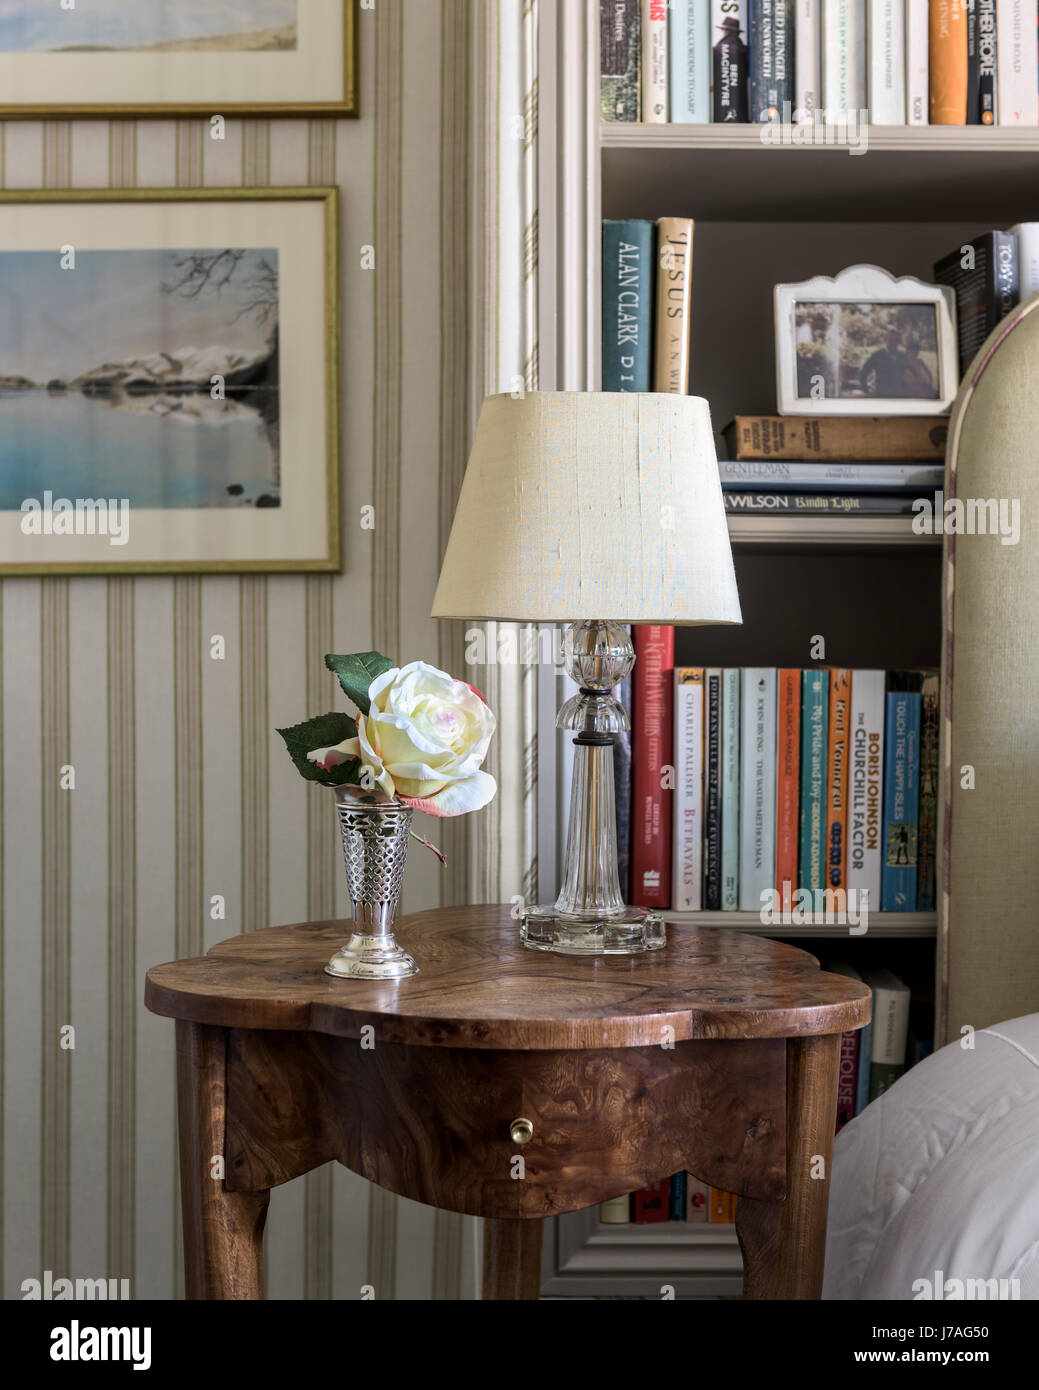 A lamp from Valerie Wade on an antique burr walnut table. The striped fabric lining the walls is by Nicole Fabre. Stock Photo